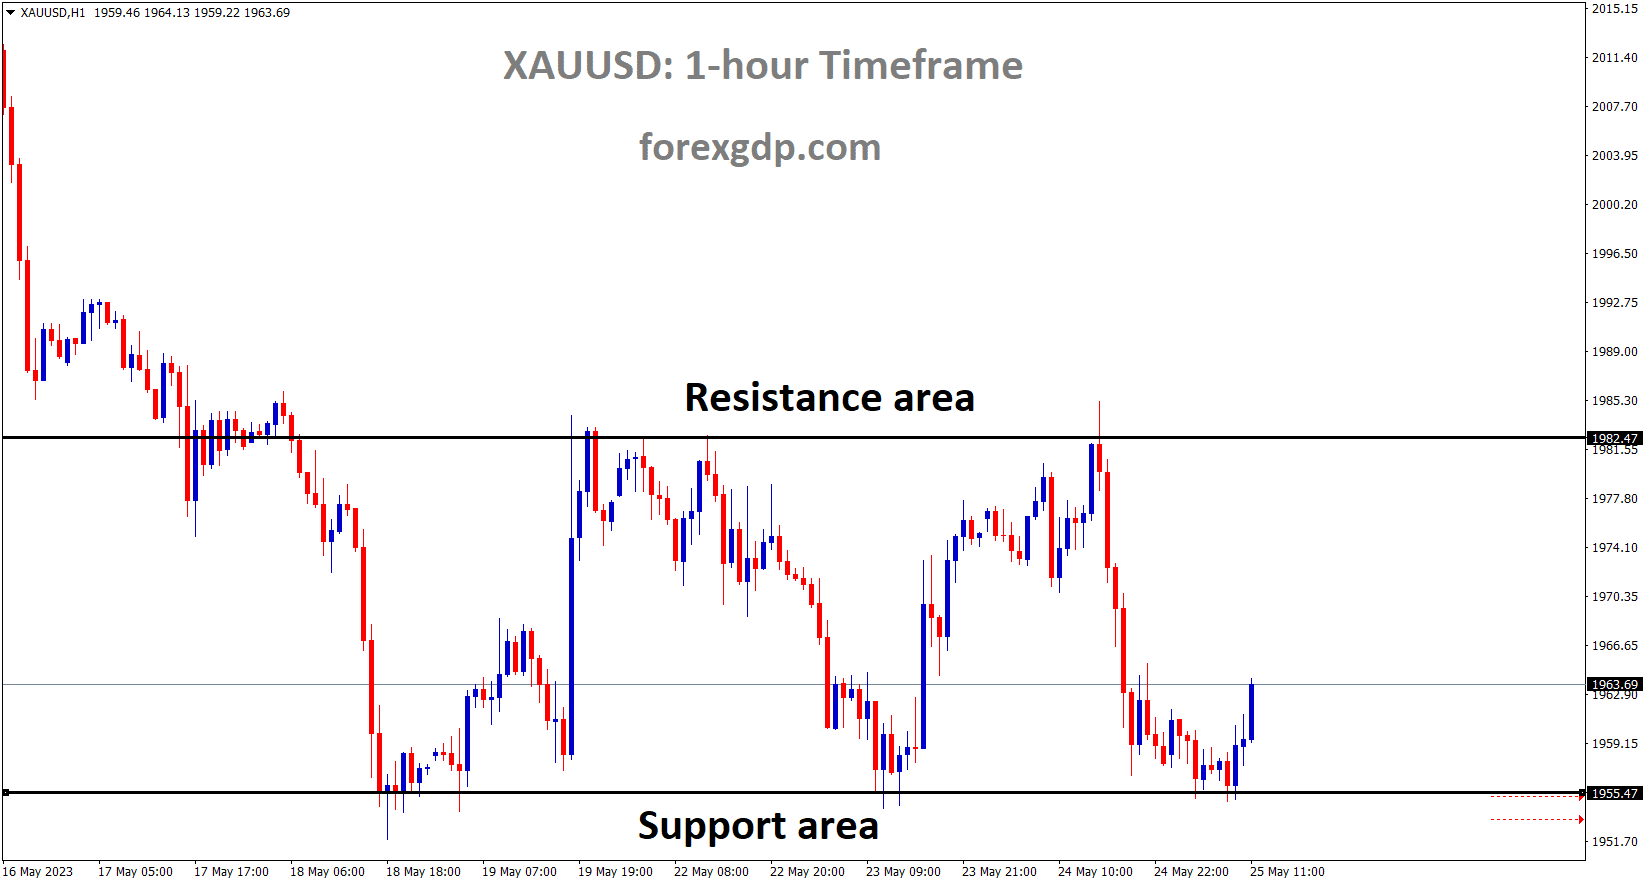 XAUUSD Gold price is moving in the Box pattern and the market has rebounded from the horizontal support area of the pattern.